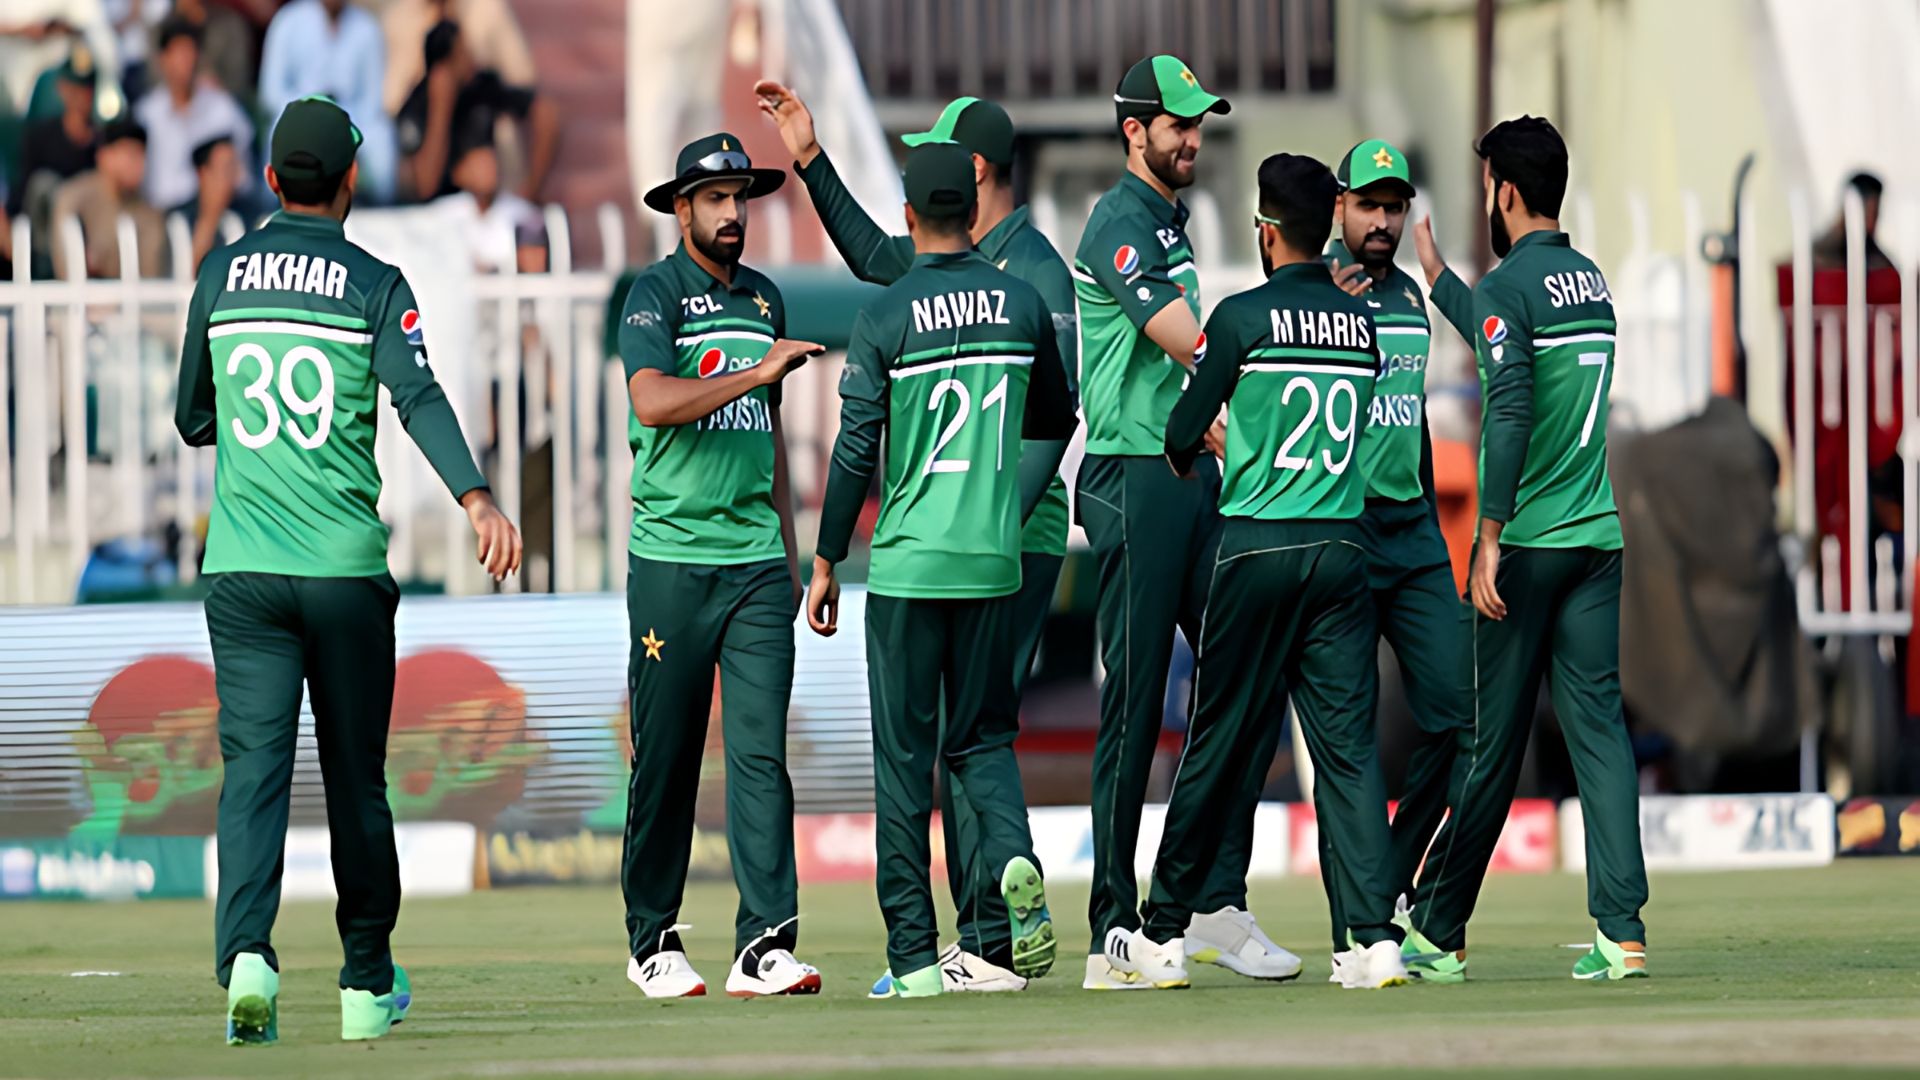 Ireland Wins Hosting for Three-Match T20I Against Pakistan in May; PCB Reveals Fixture